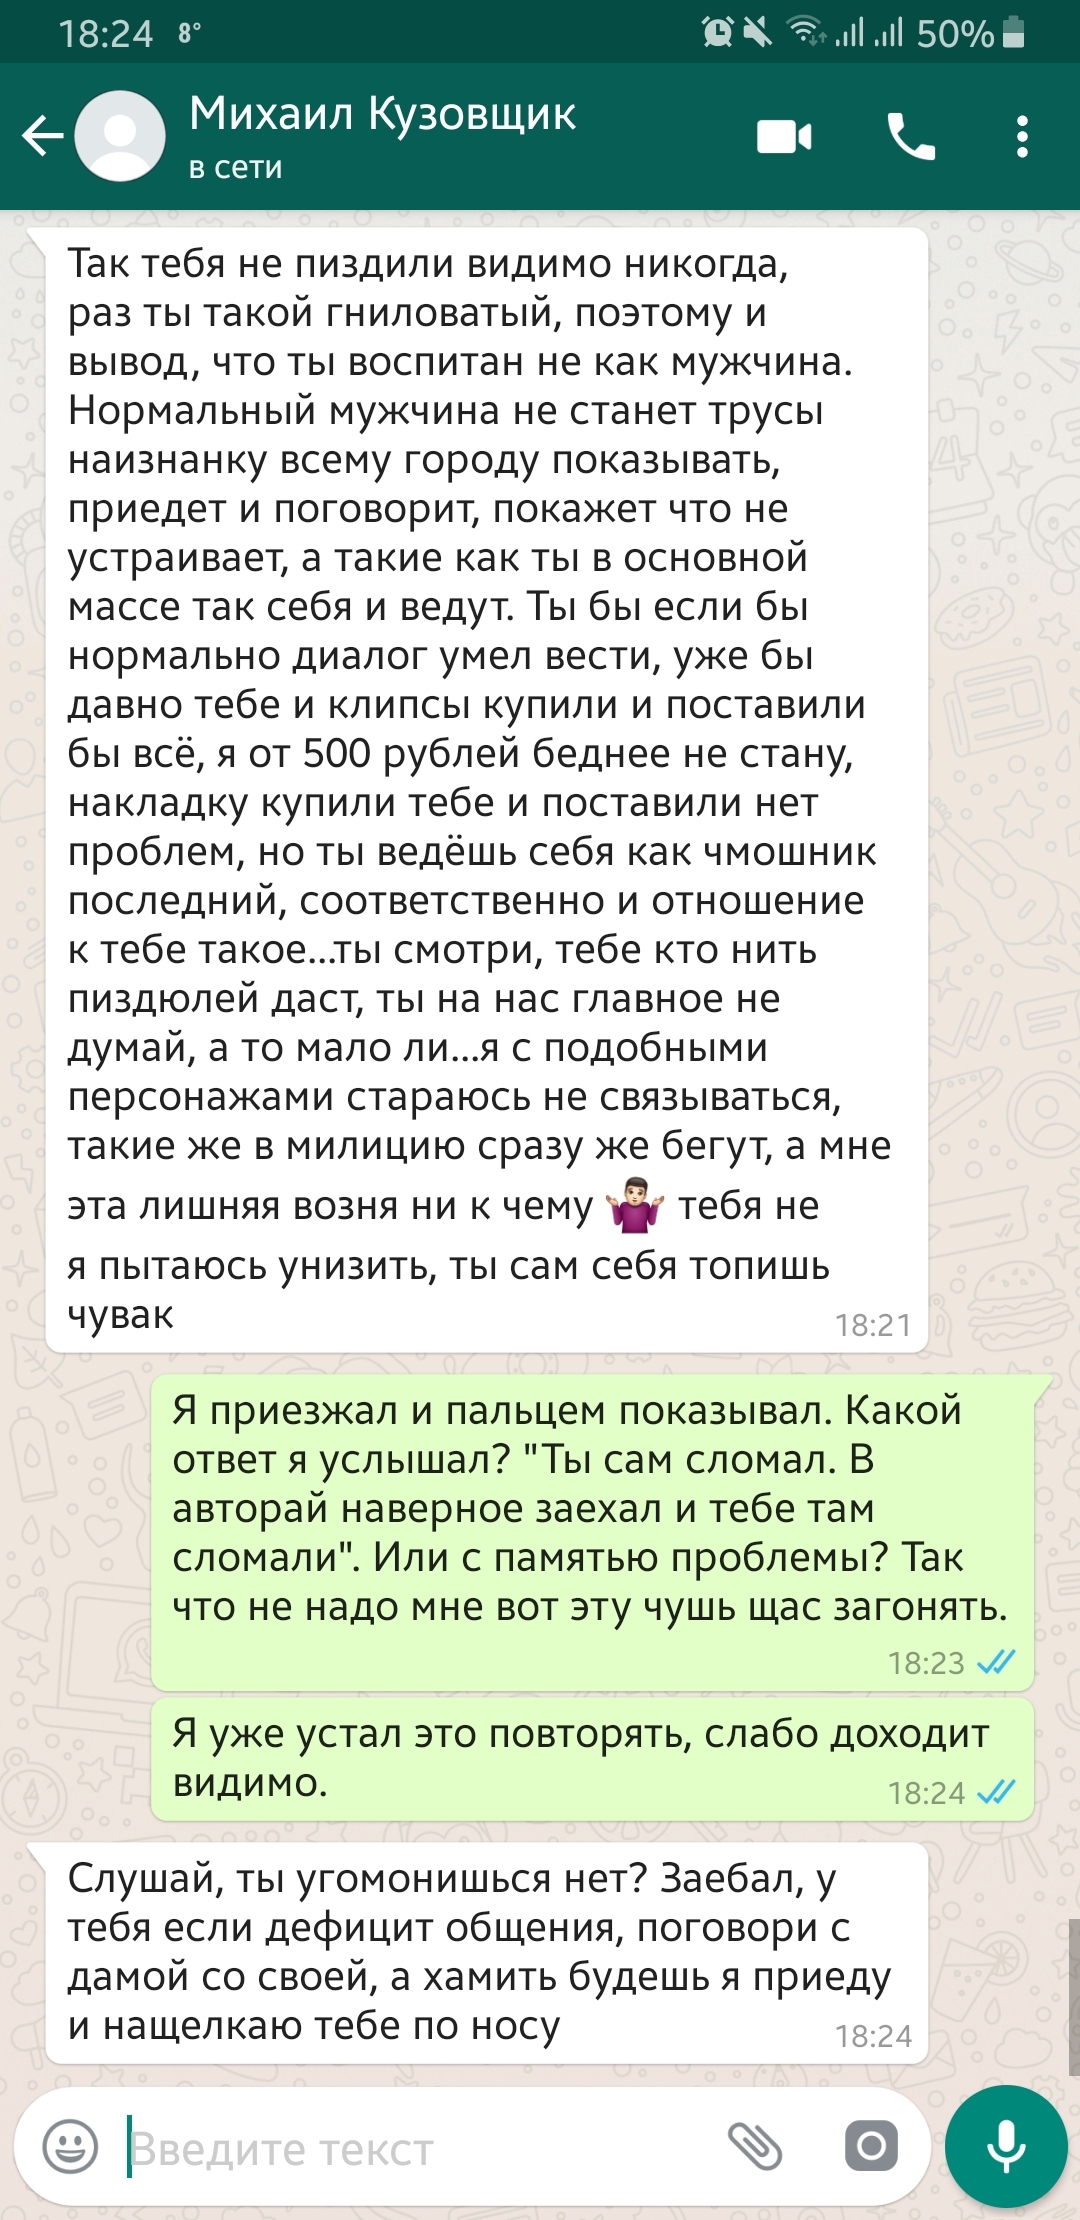 Business in Russian or how the owner of a car service responds to a negative review. - My, Car service, Longpost, Business in Russian, Impudence, Threat, Auto repair, Rukozhop, Review